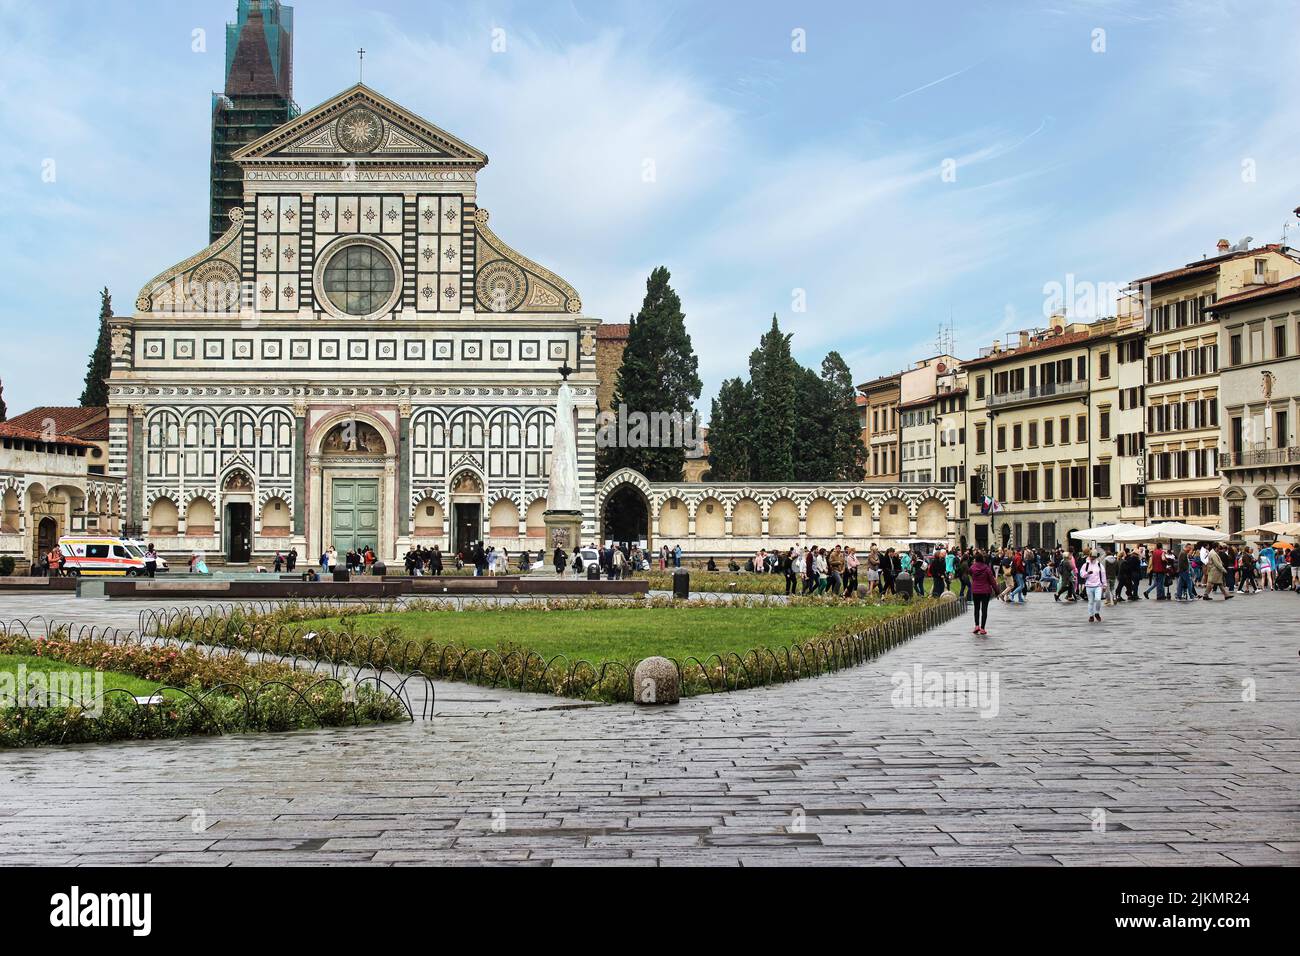 One of the most famous churches in Florence, the churches of Santa Maria Novella in the homonymous square Stock Photo